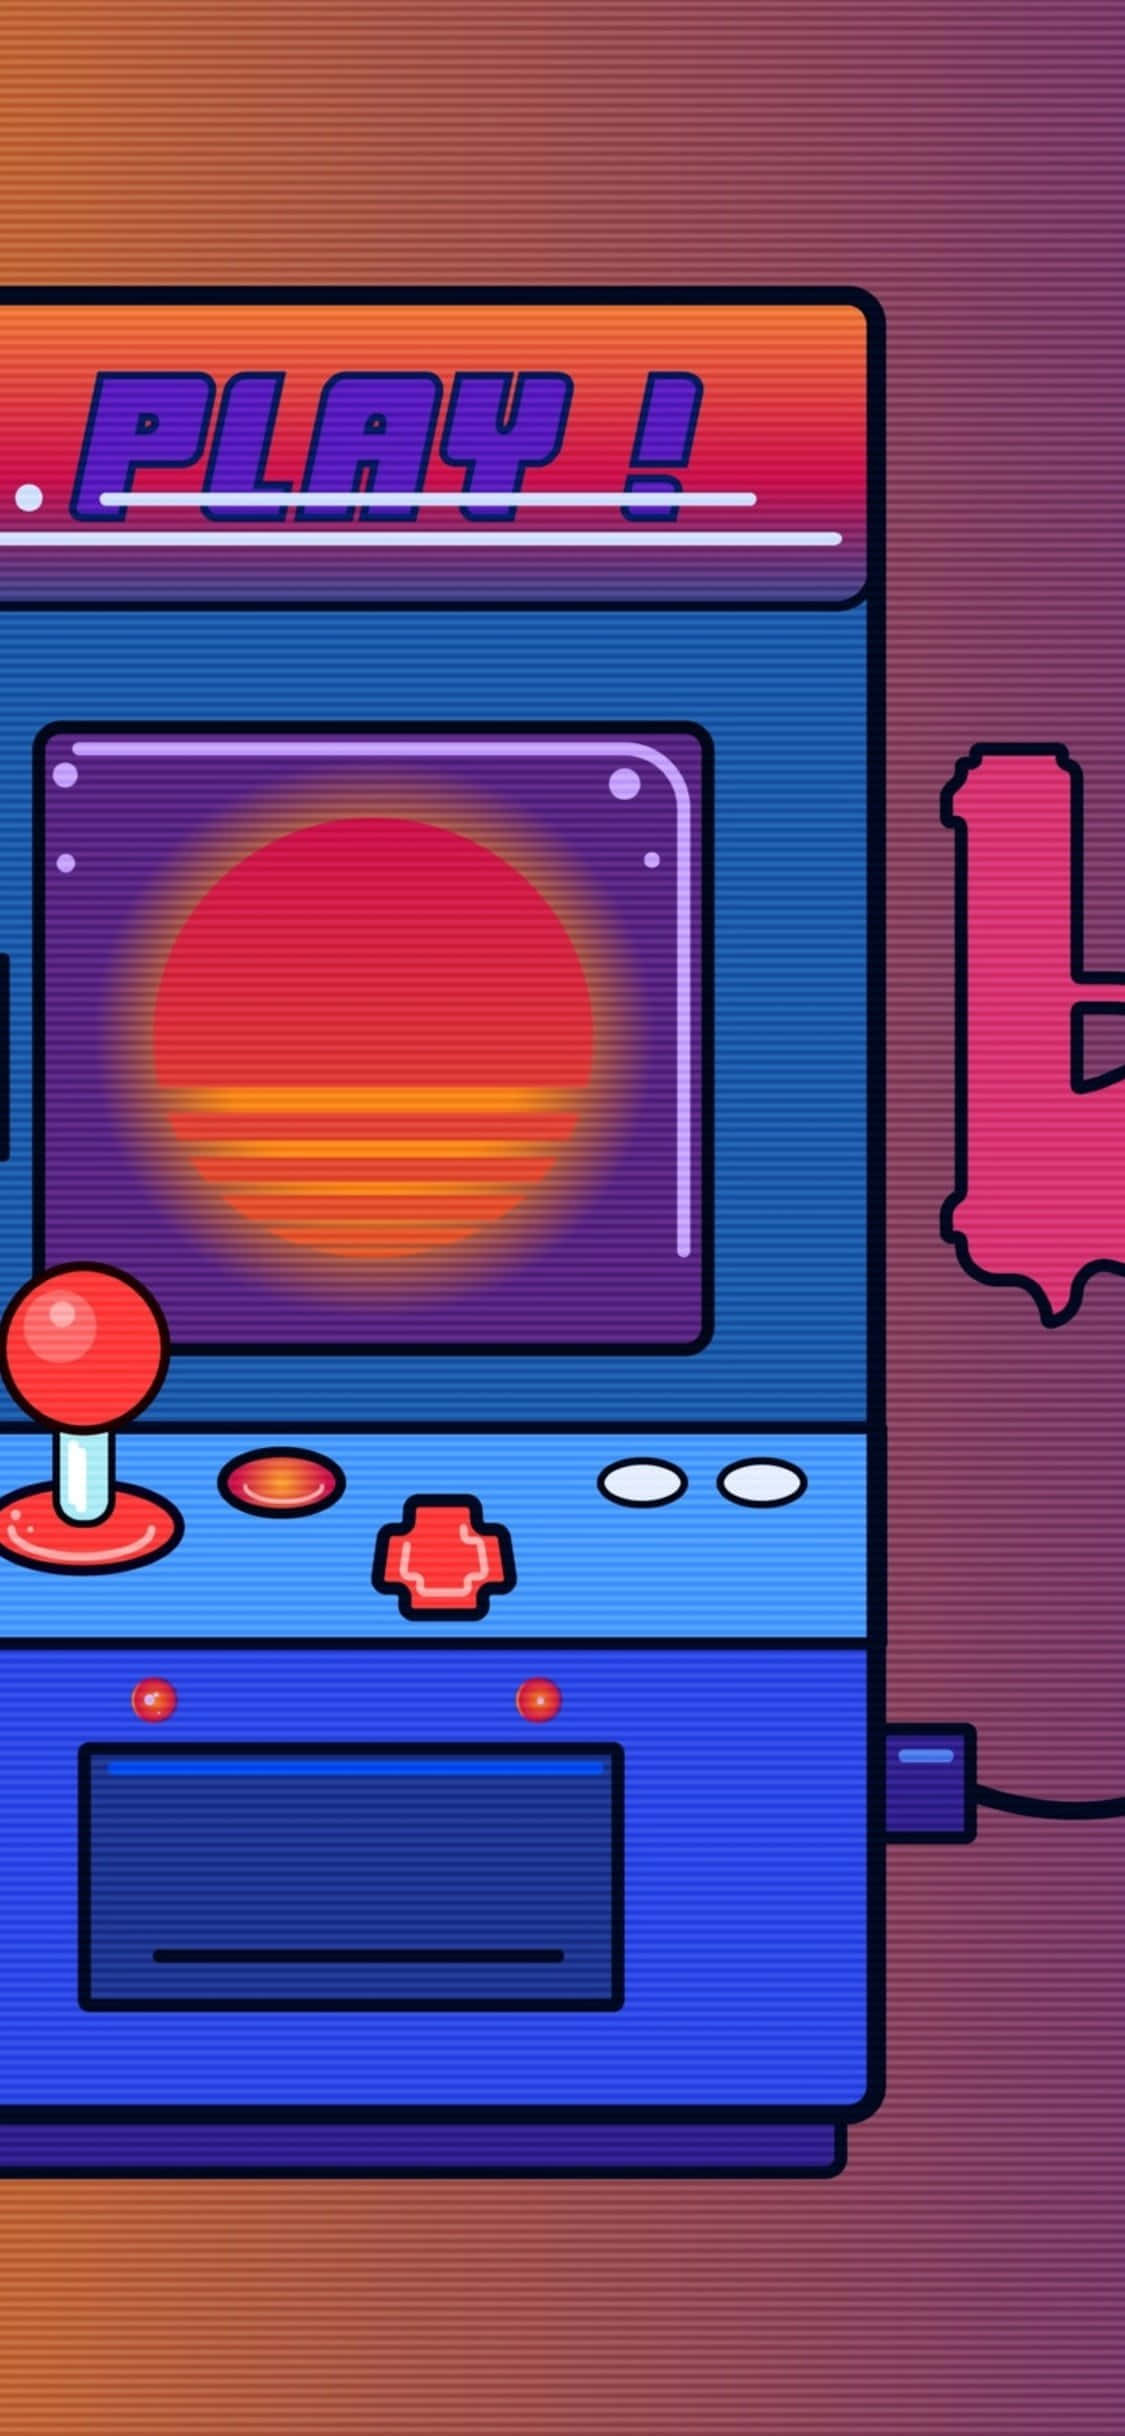 Immersive Arcade Gaming On Iphone Wallpaper